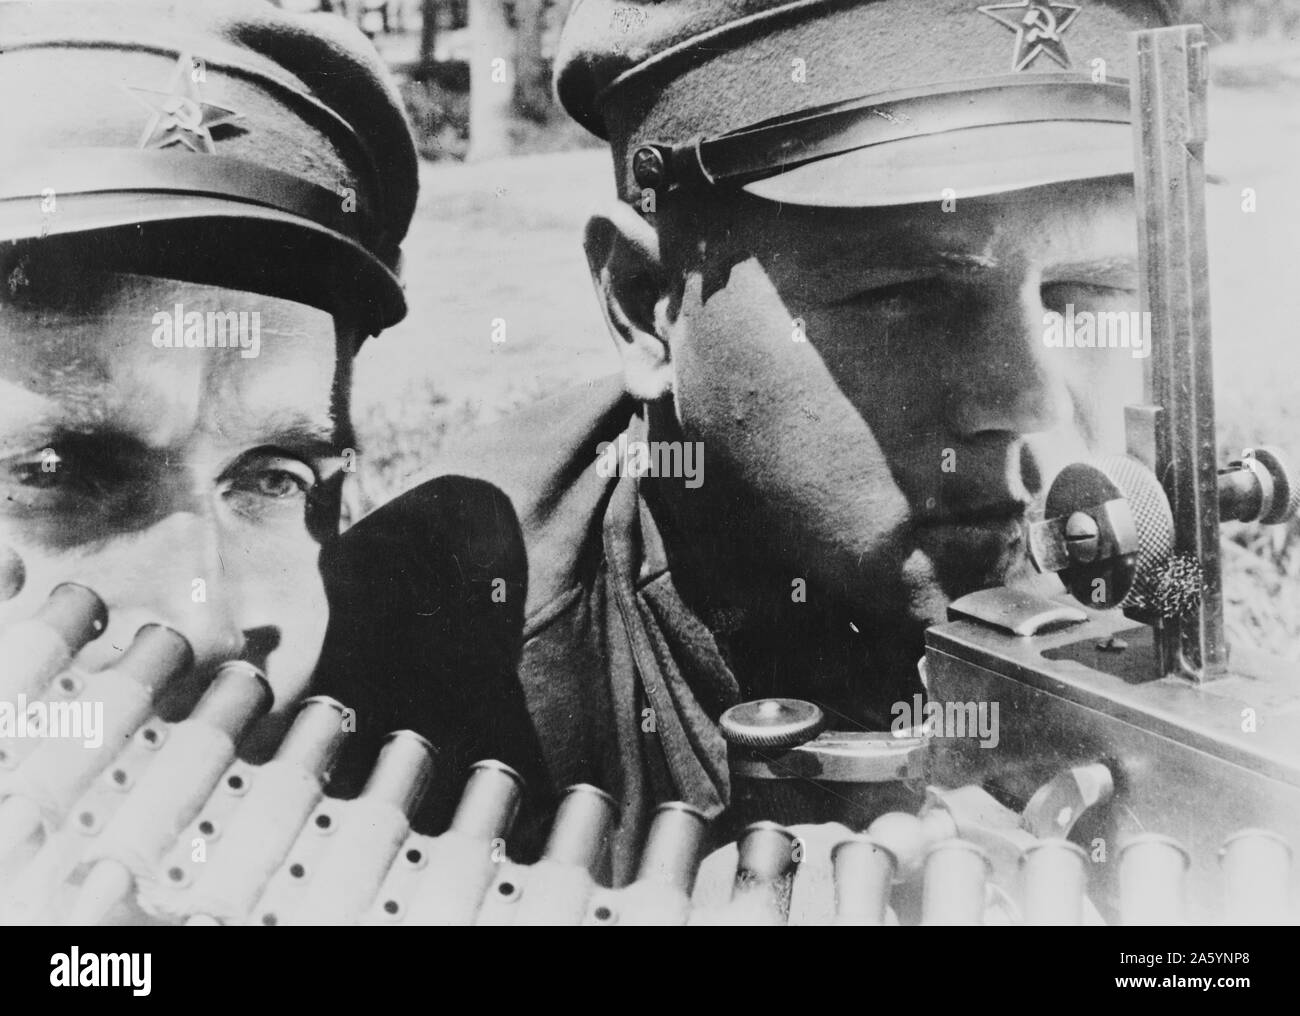 Machine gunners of the far eastern Red Army in the USSR (Union of Soviet Socialist Republics) World War II 1941 Stock Photo